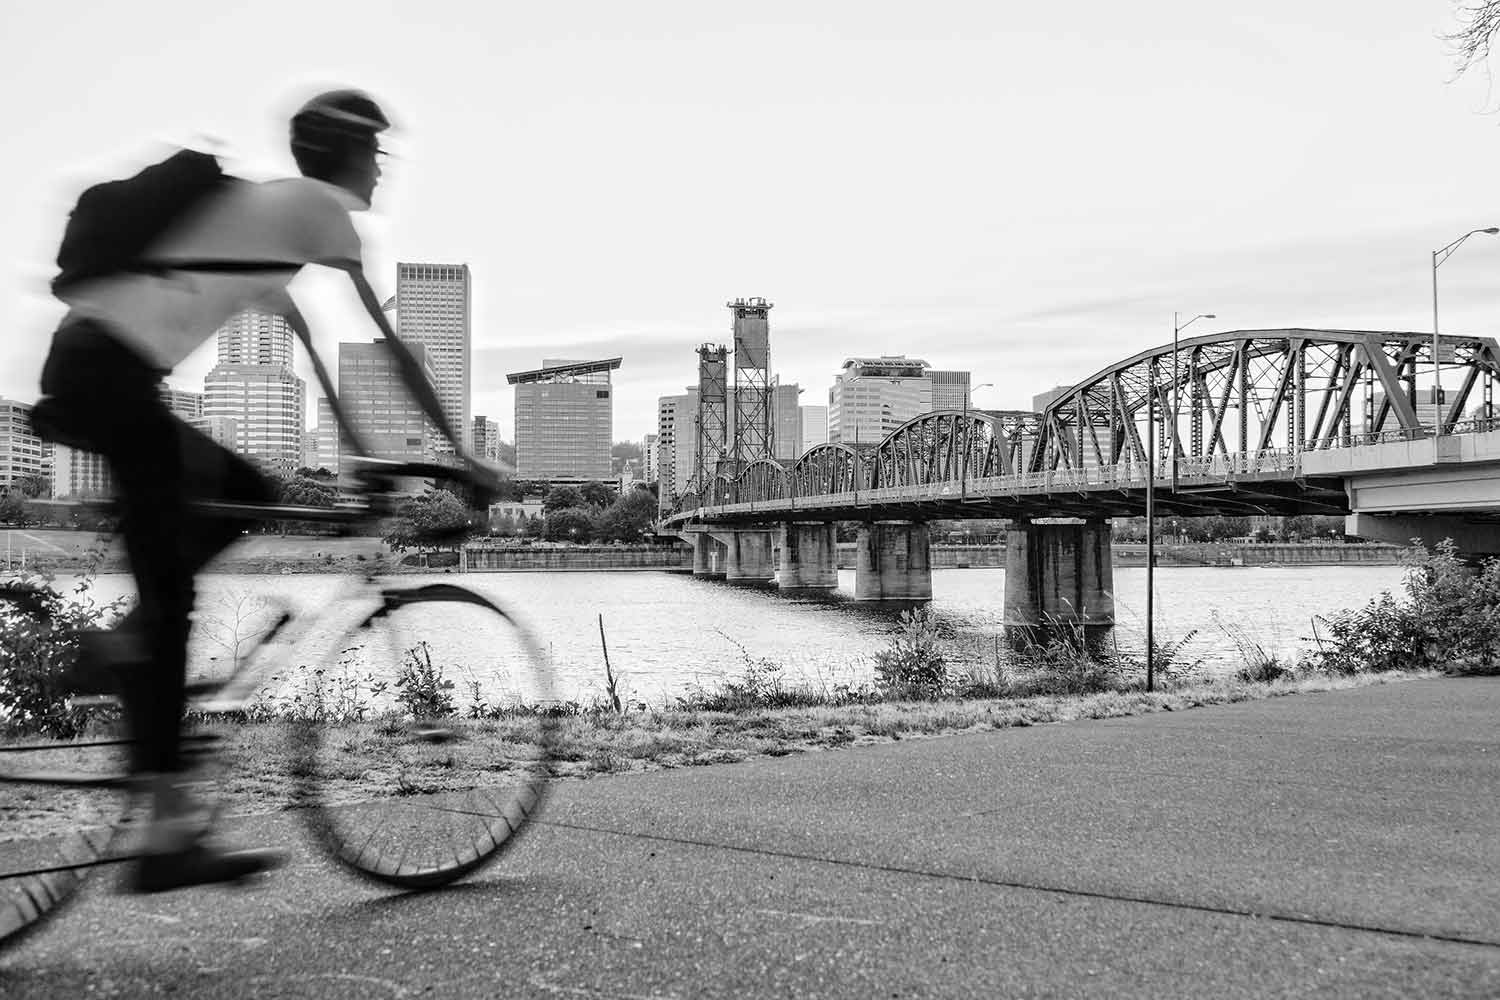 Man riding bike in Portland, OR near the water, overlooking the skyline.